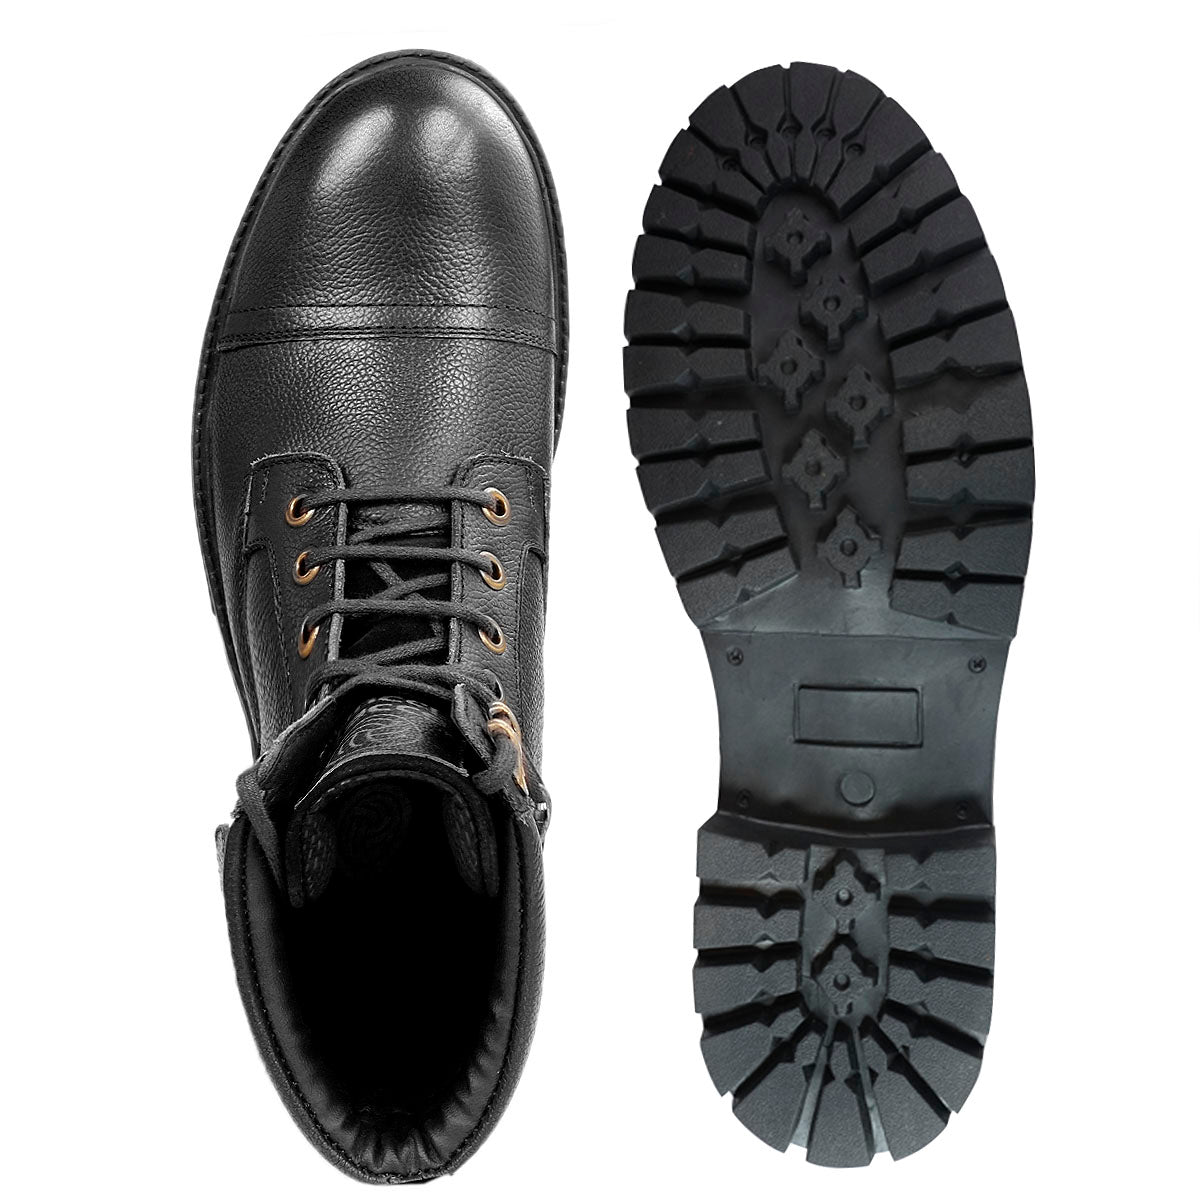 Bacca Bucci Street Fighter Chukka Derby Boots for Men | Motorcycle Boots